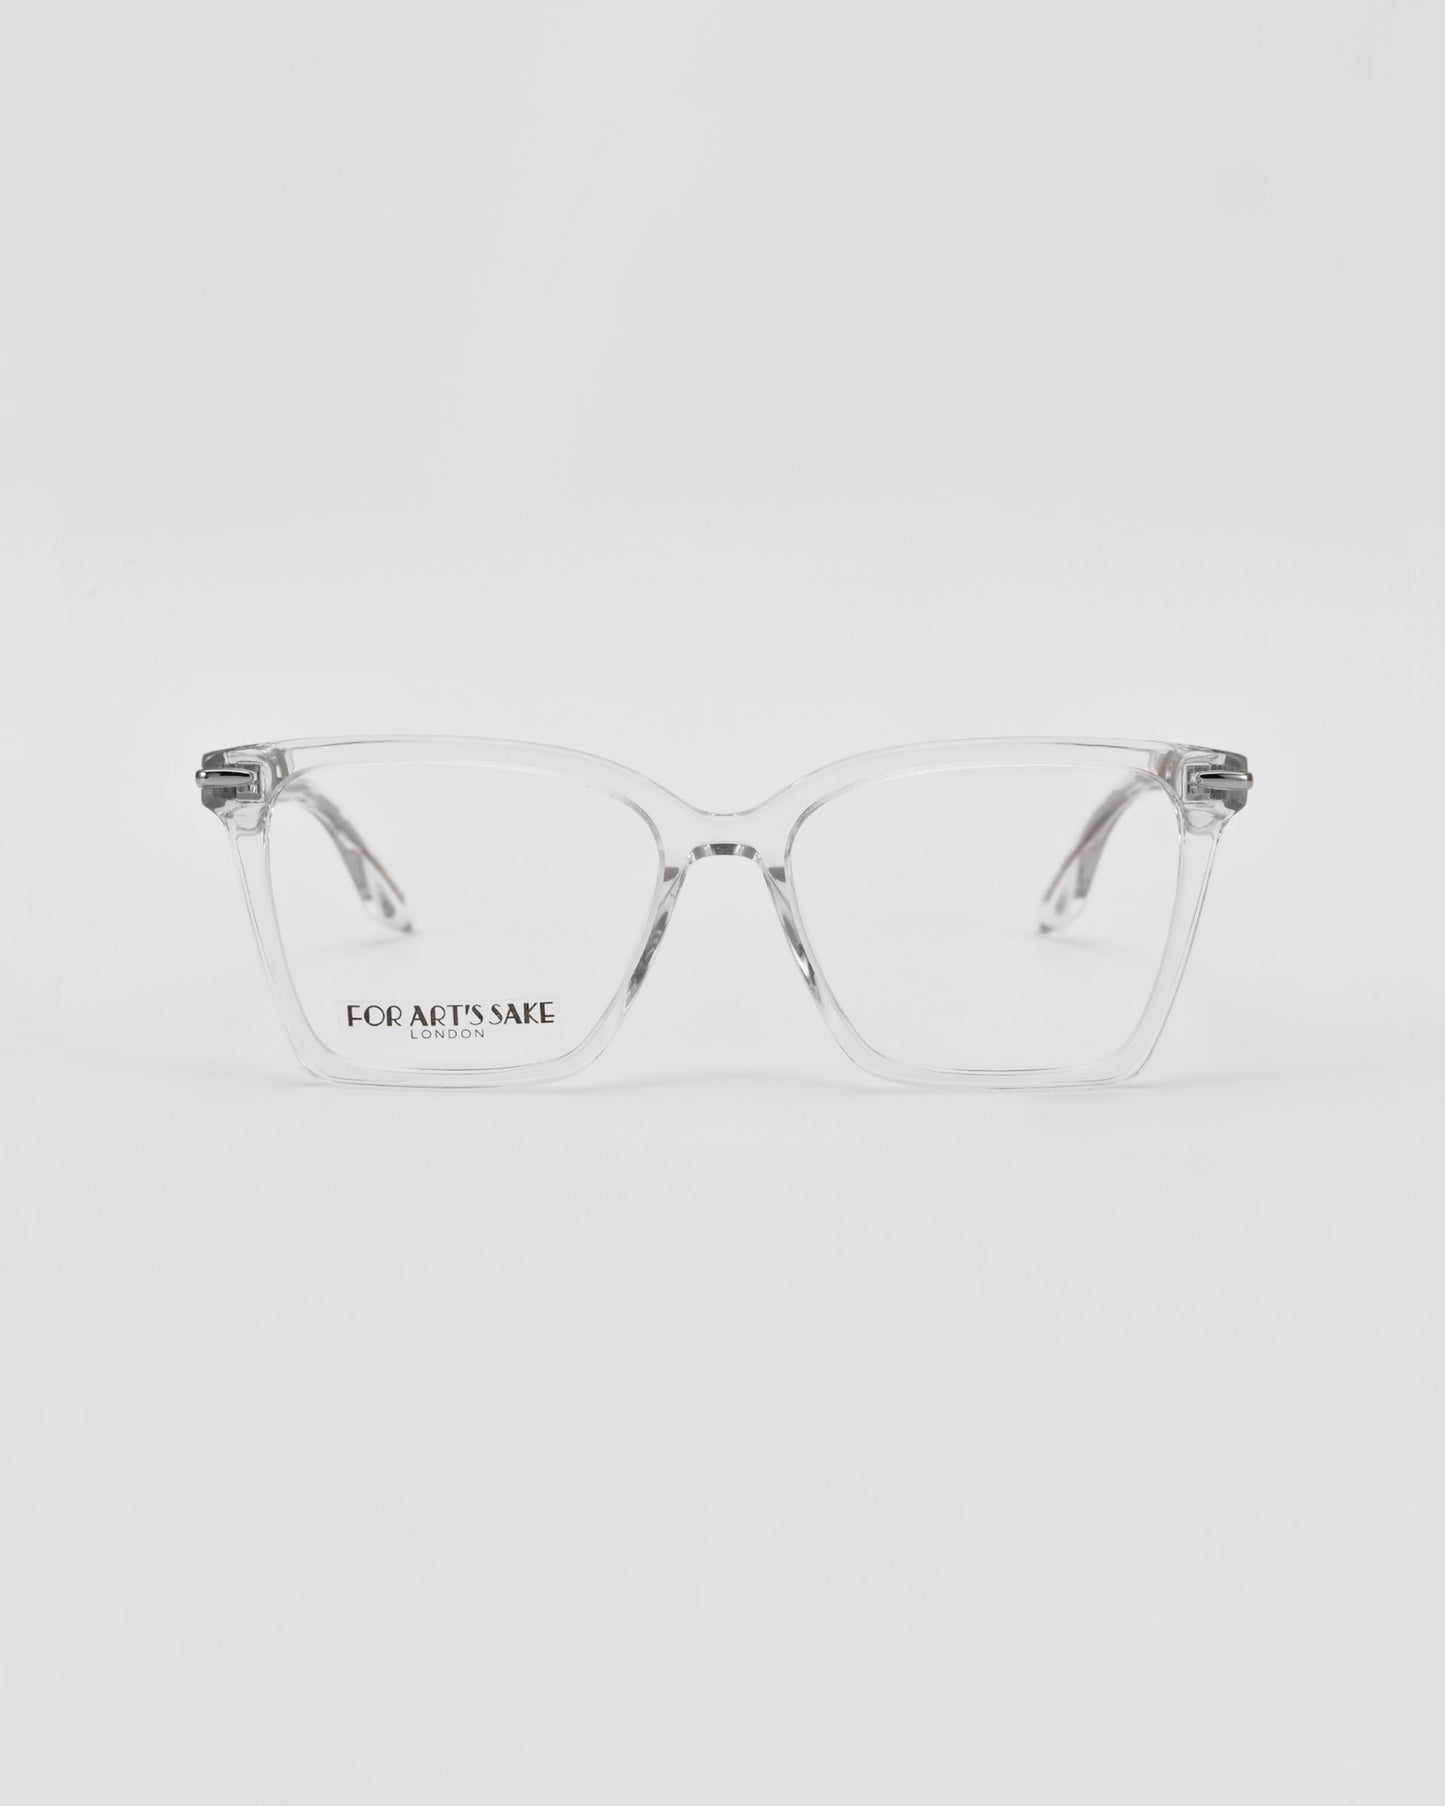 Clear rectangular optical glasses on a white background.